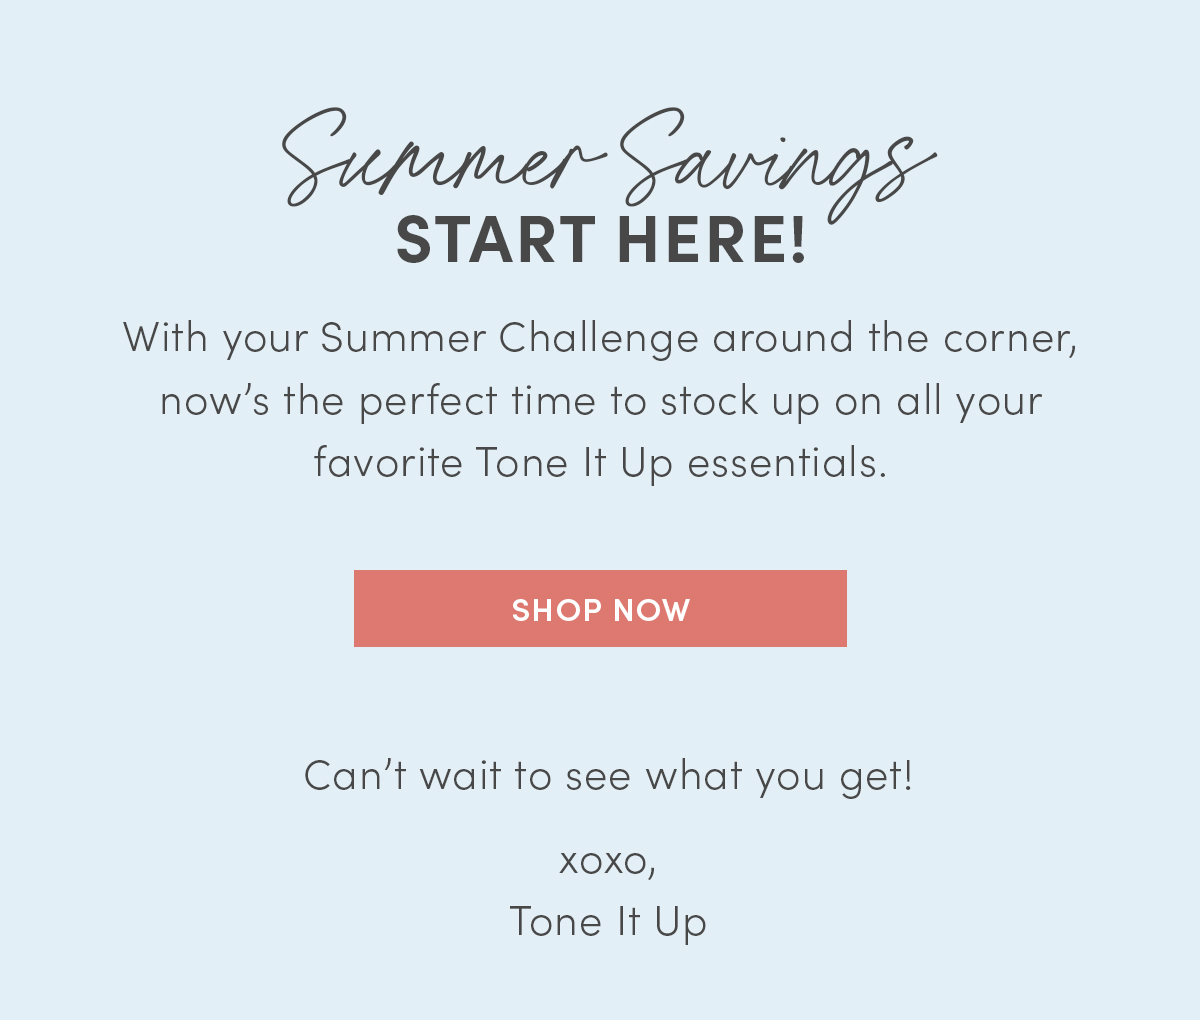 Summer Savings Start Here! With your summer challenge around the corner, now's the perfect time to stock up on all your favorite Tone It Up essentials. 